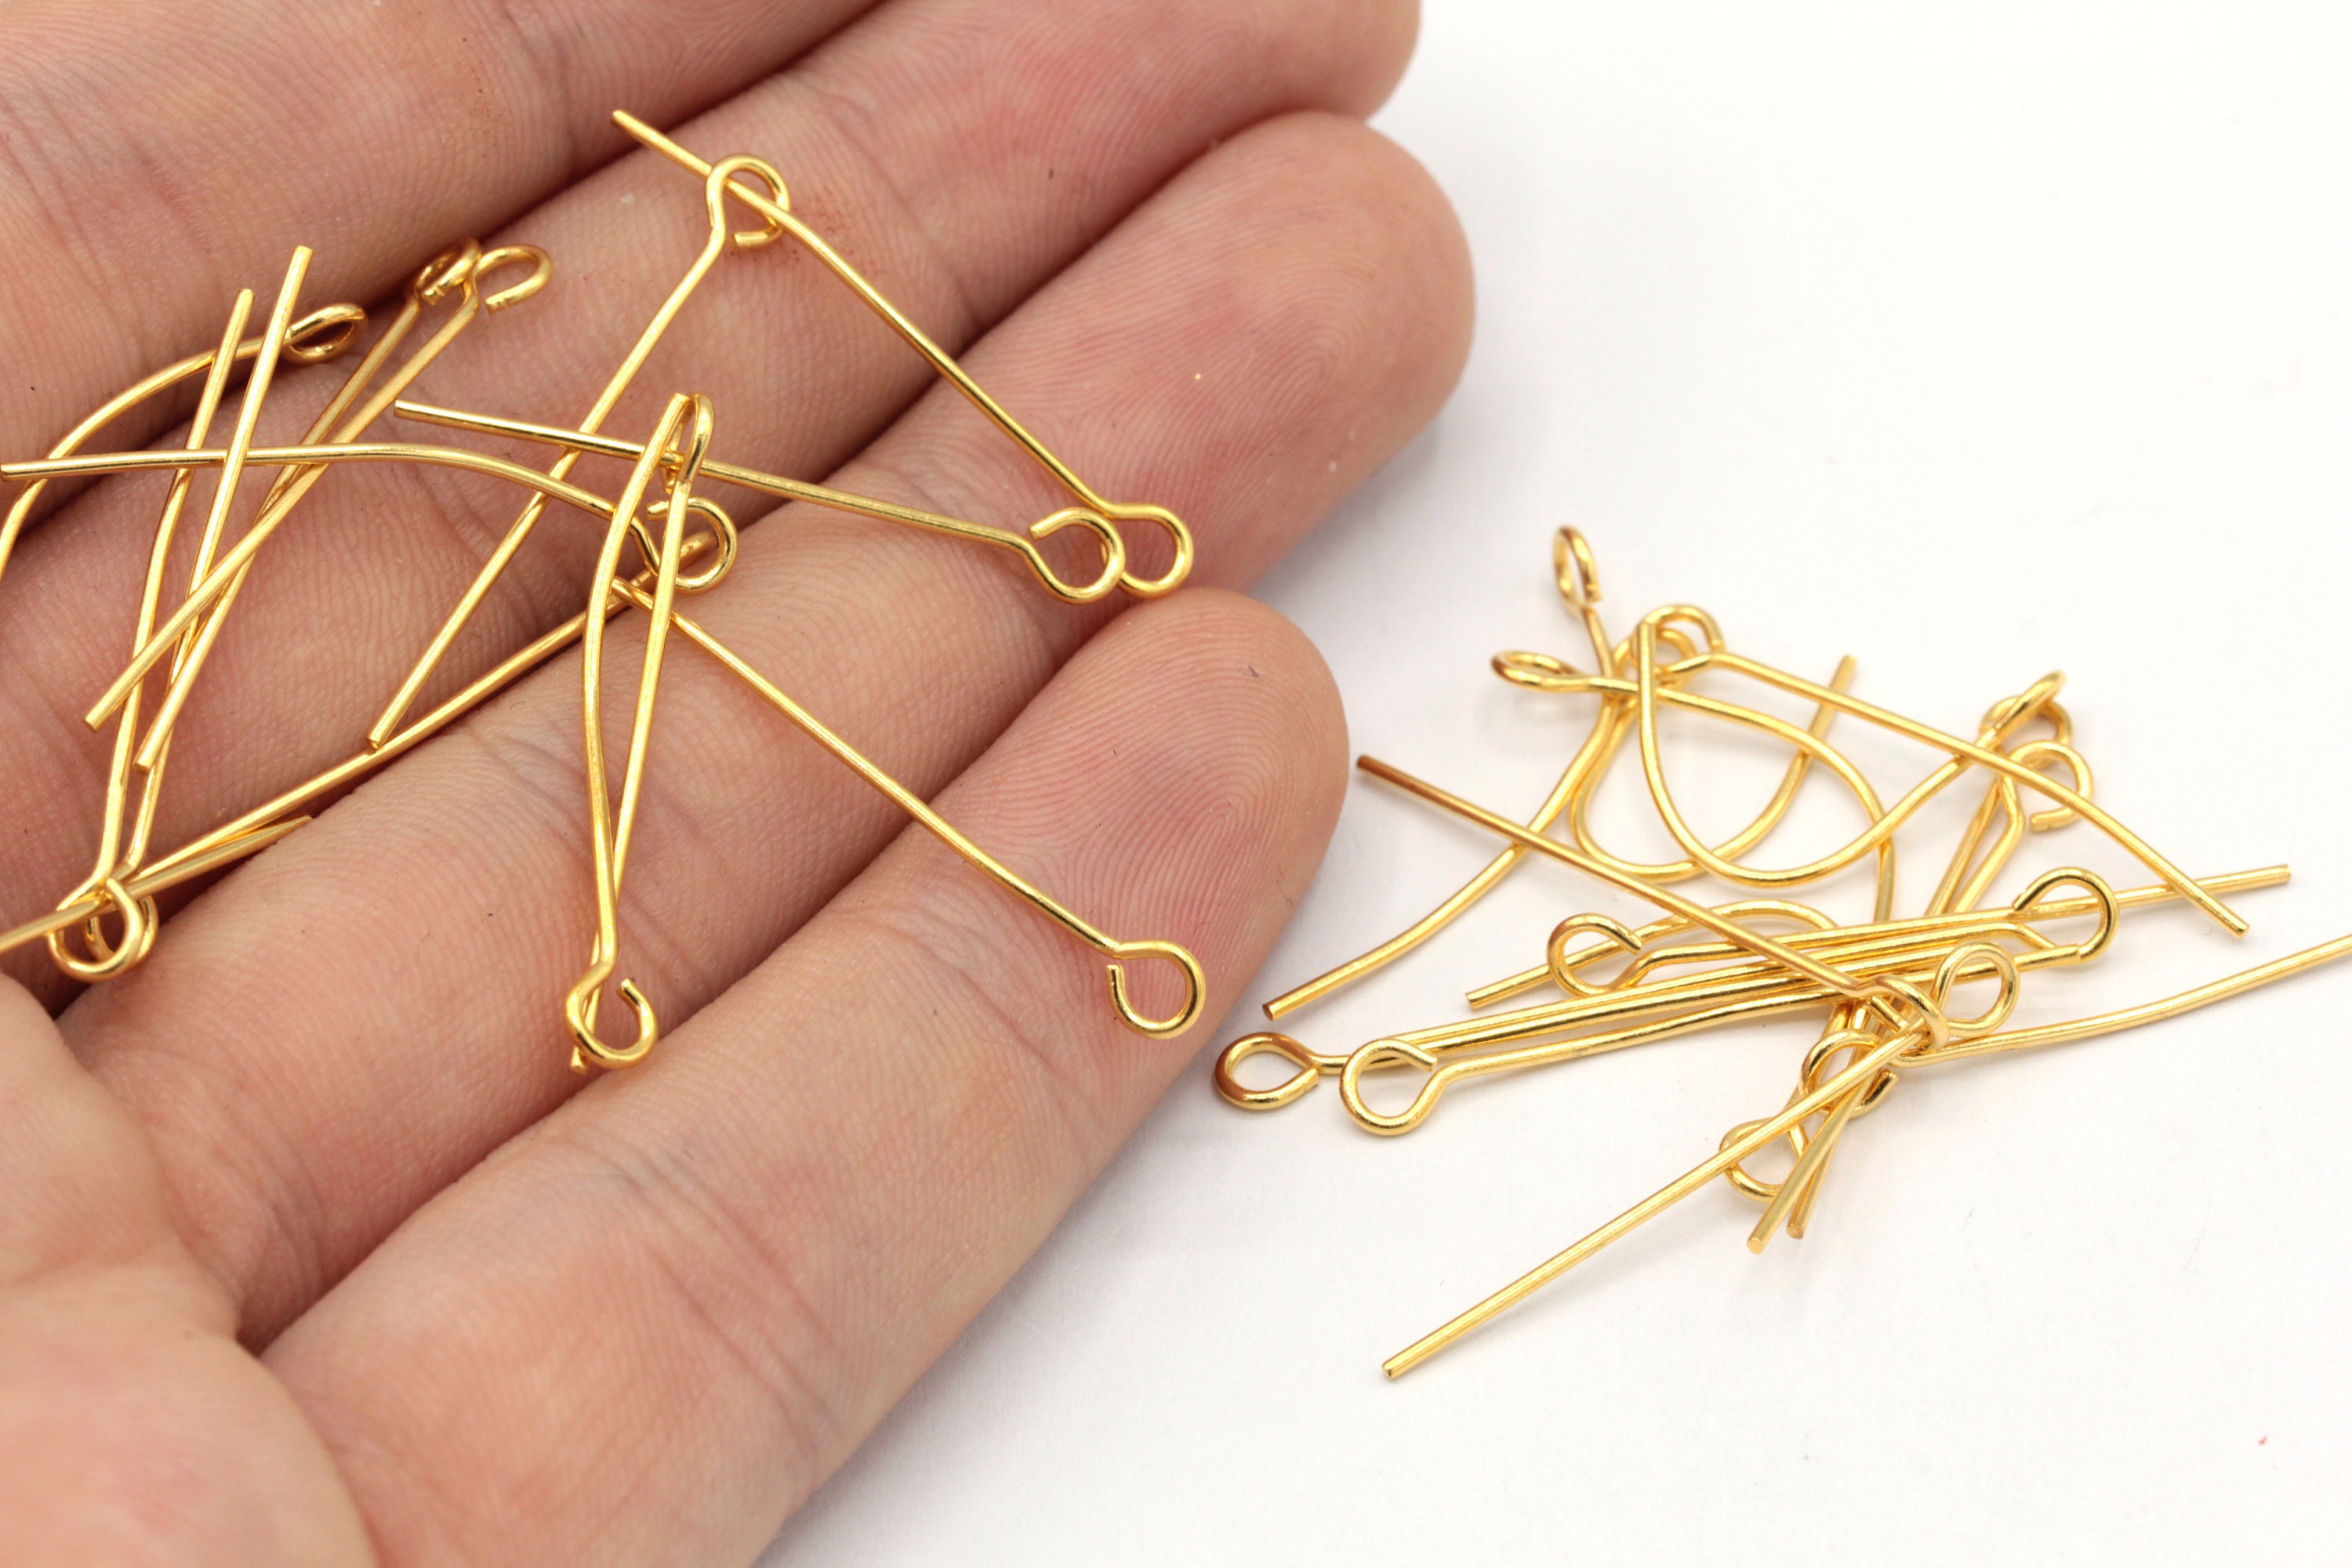 2 inch Eye Pins- Gold (20 pieces)